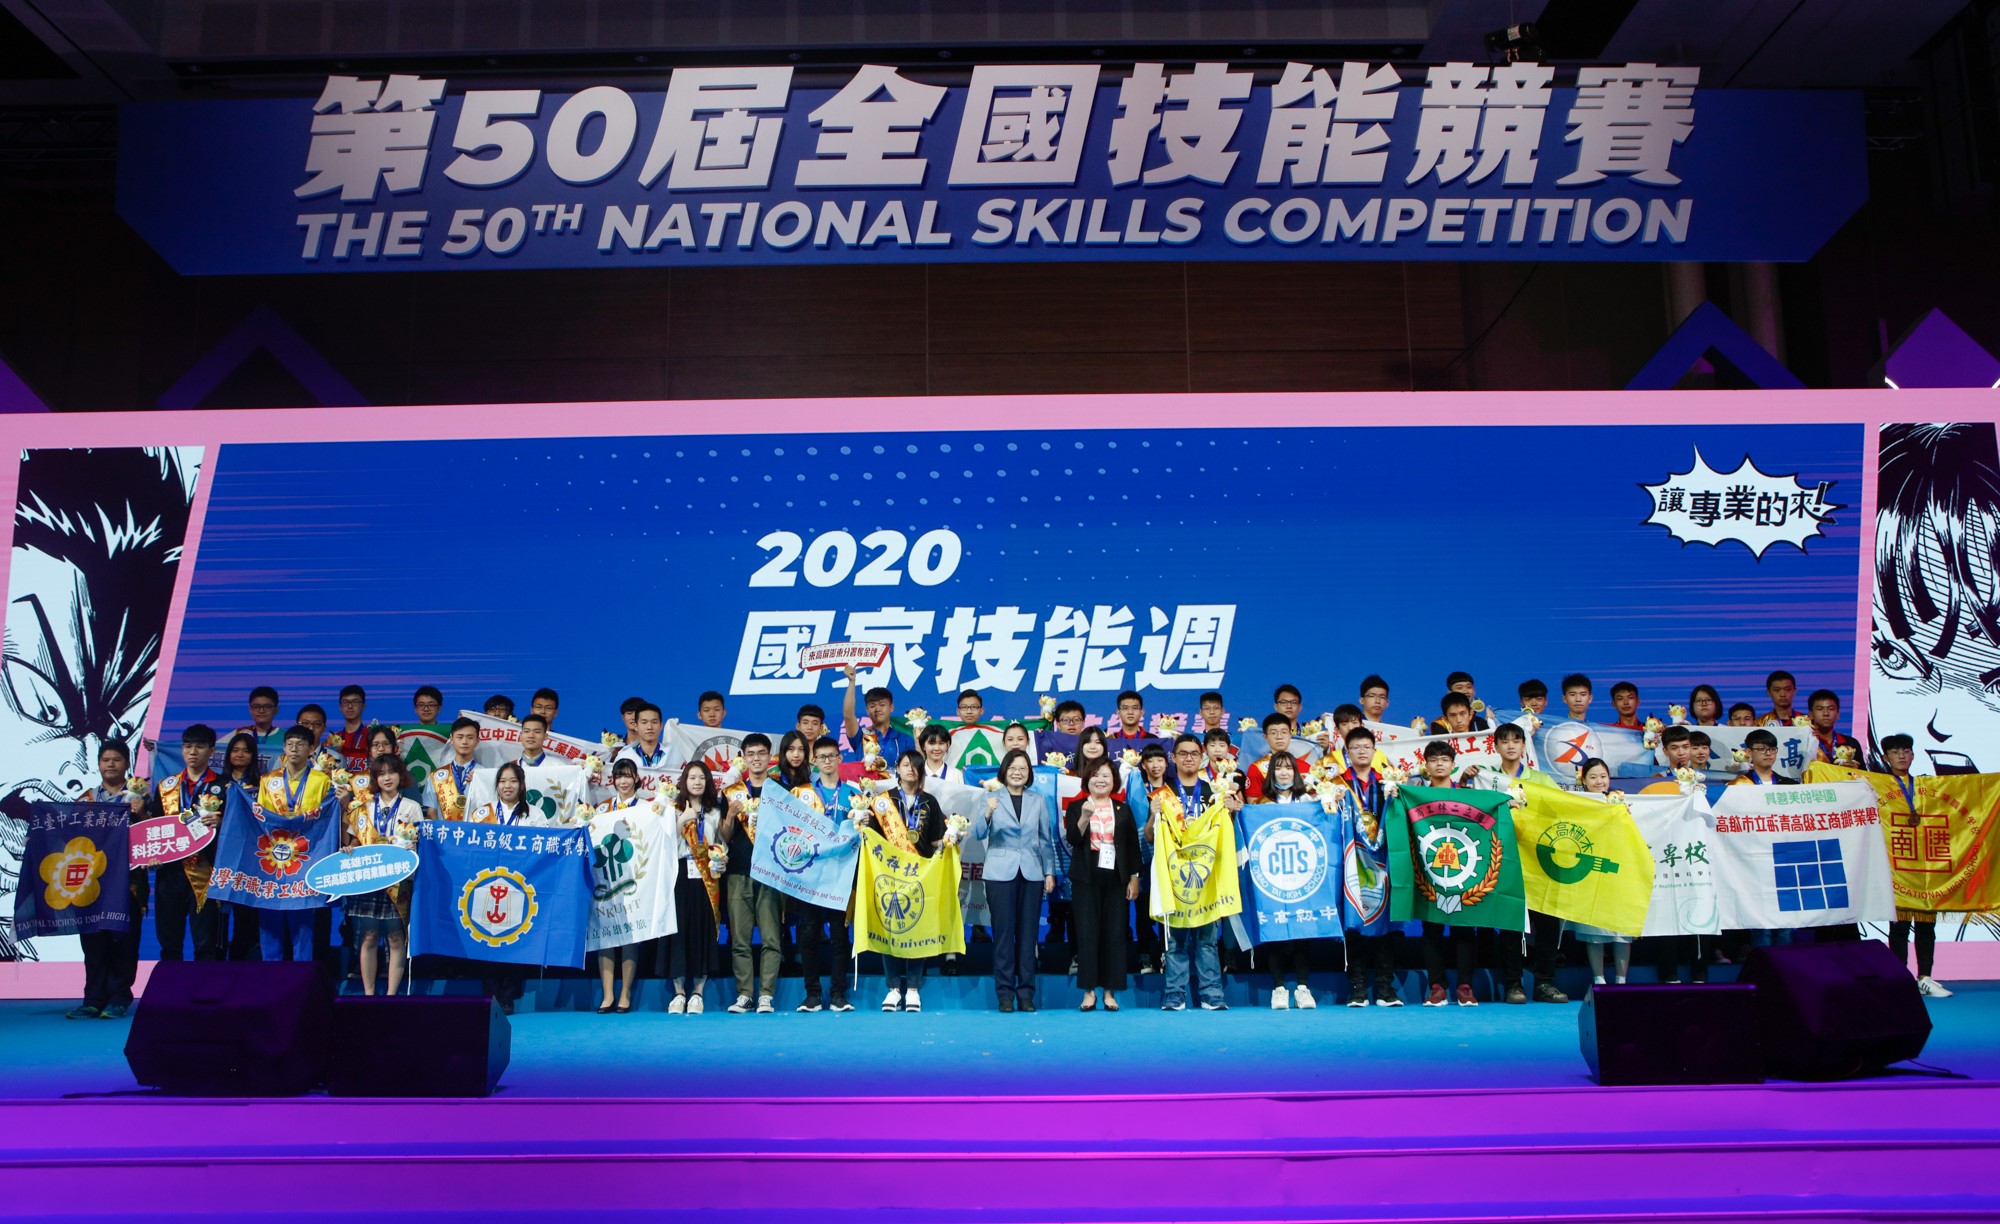 Results of 50th National Skills Competition Announced 2020 National Skills Week a Resounding Success